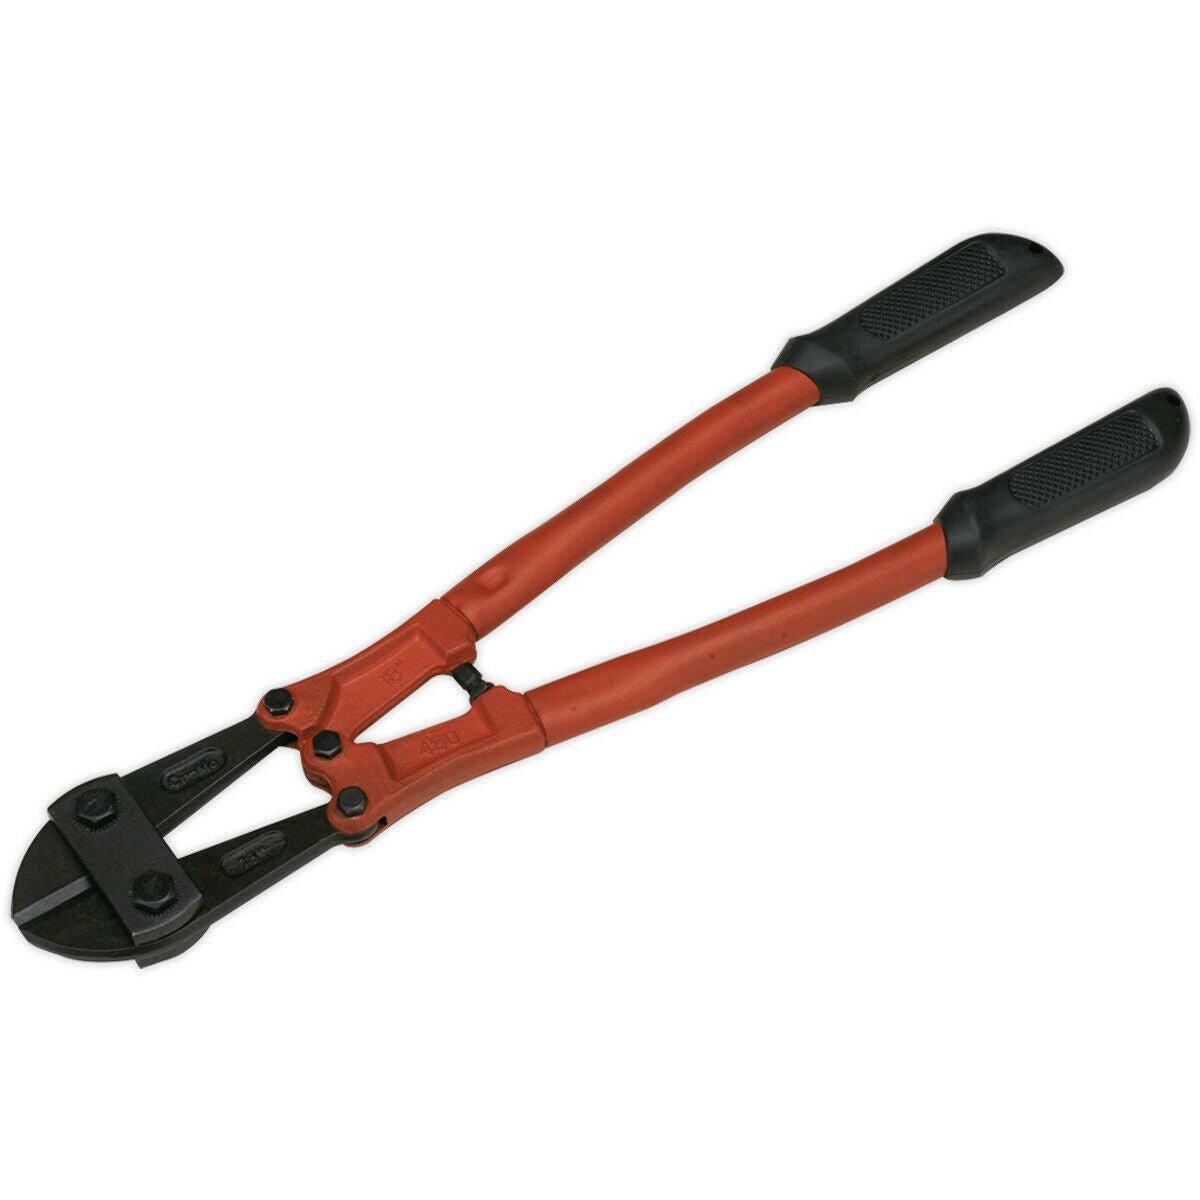 450mm Bolt Cropper - 8mm Jaw Capacity - Chromoly Steel Jaws - Rubber Grips